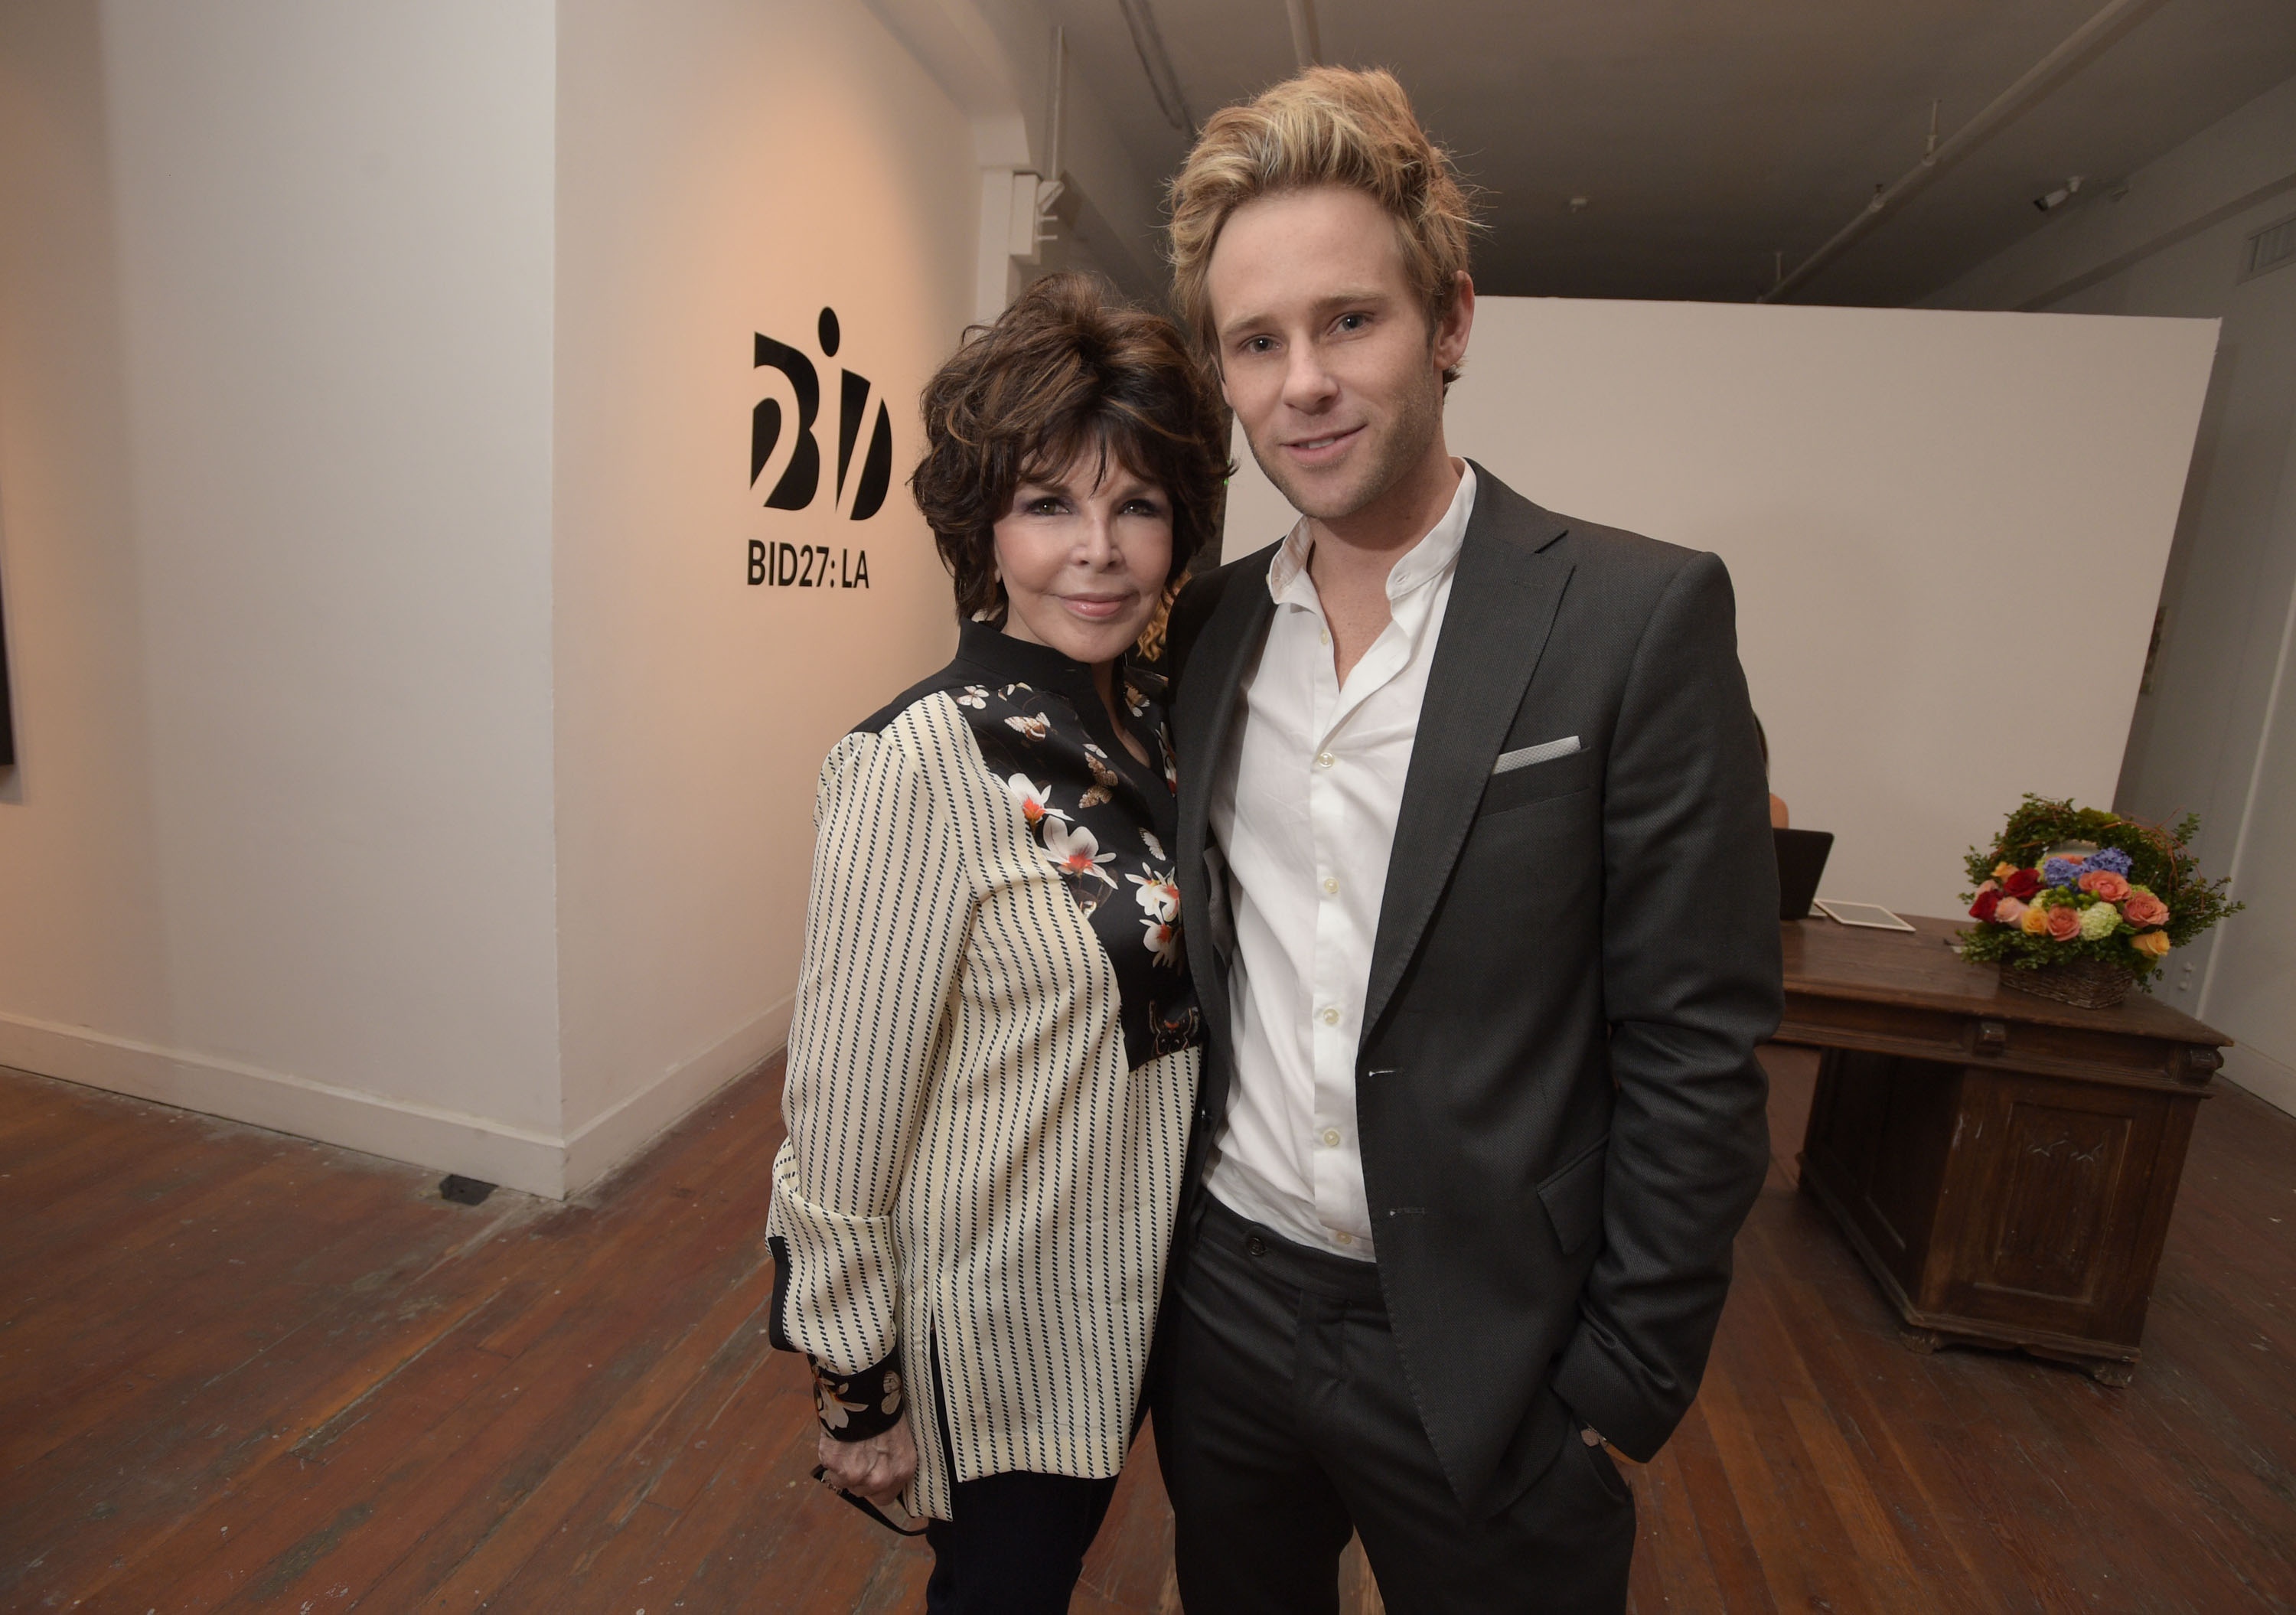 LOS ANGELES, CA - MAY 09: Singer Carole Bayer Sager (L) and artist Bryan Fox attend We. Alone. a photography exhibit by Bryan Fox at Think Tank Gallery on May 9, 2015 in Los Angeles, California.